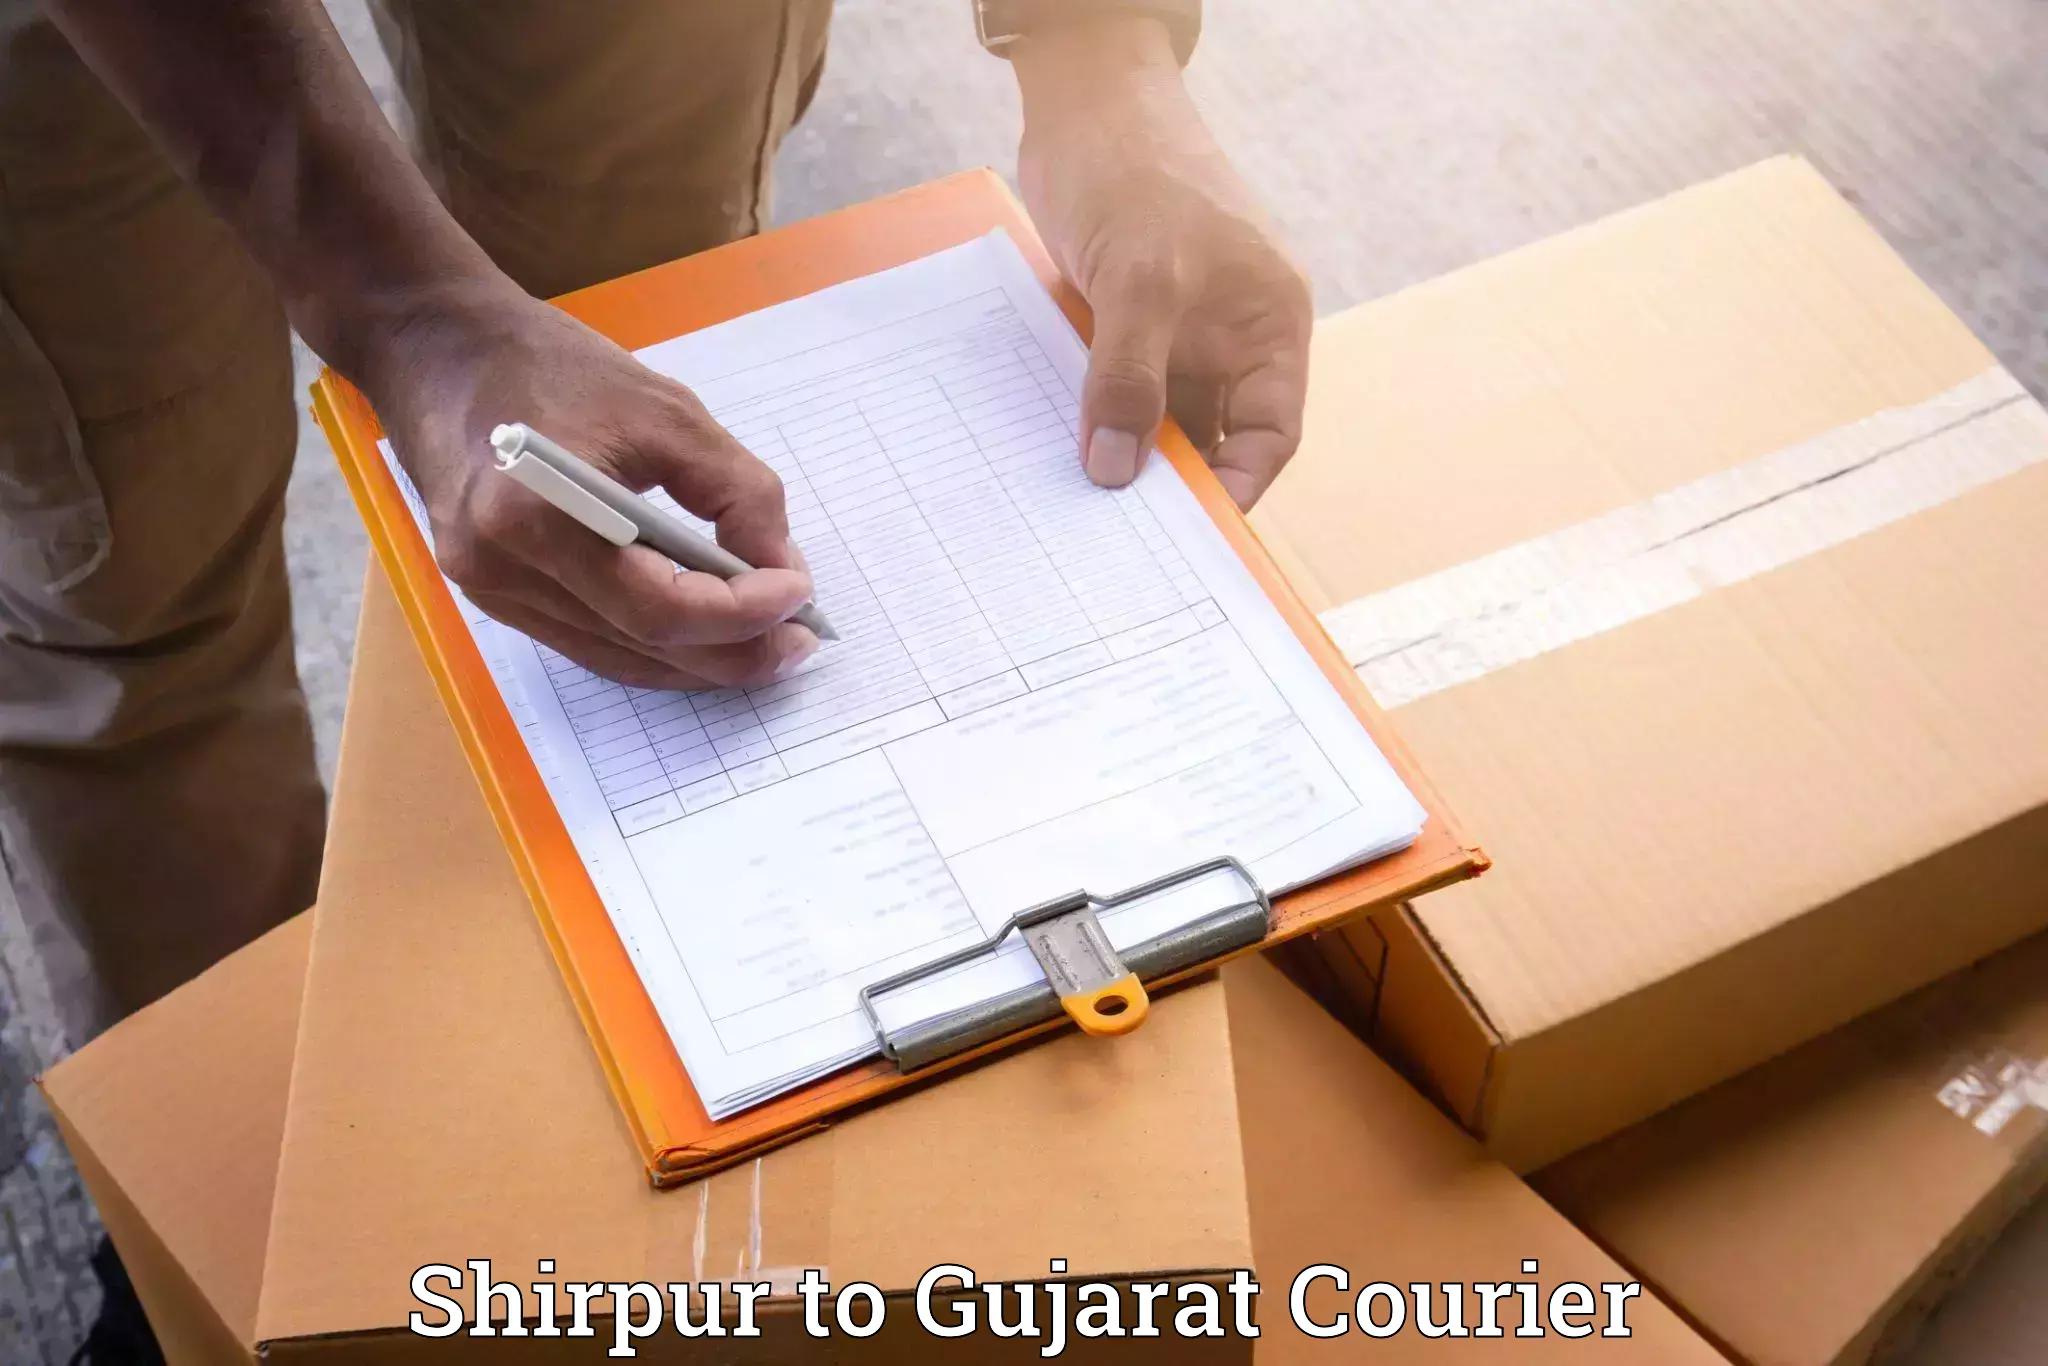 Household goods transport service Shirpur to Ahmedabad